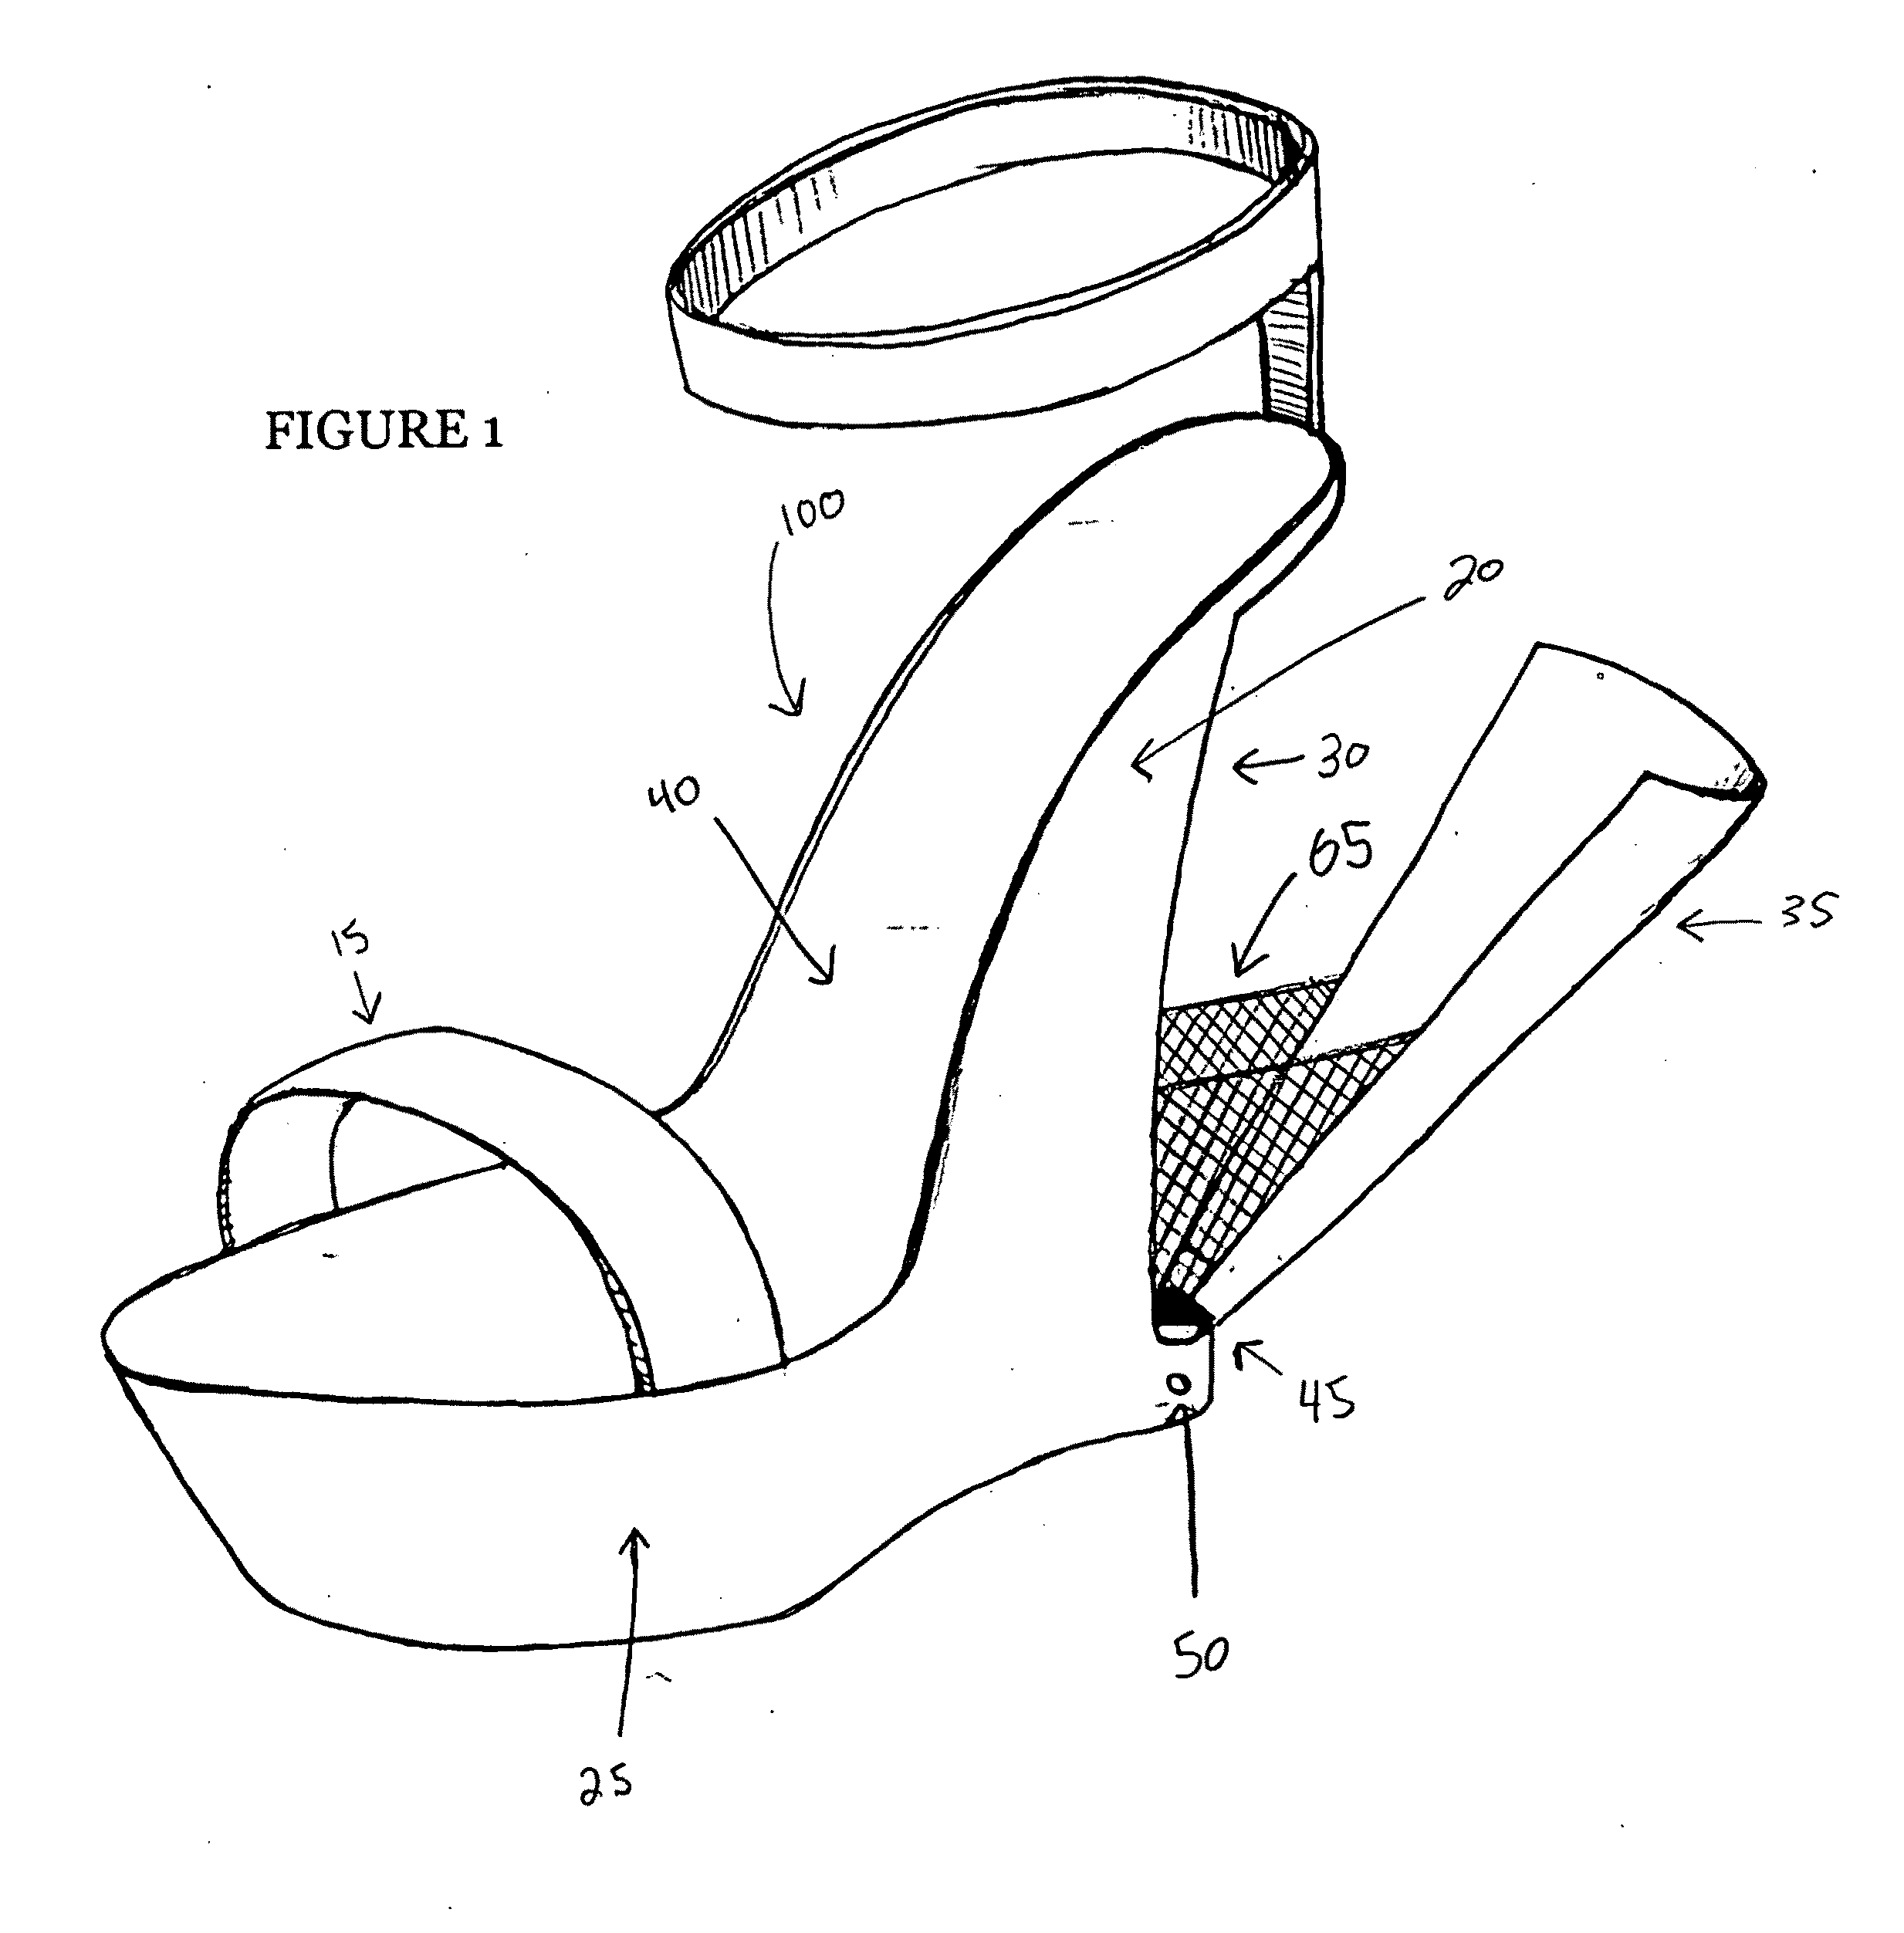 Shoe With Concealed, Heel Storage Compartment